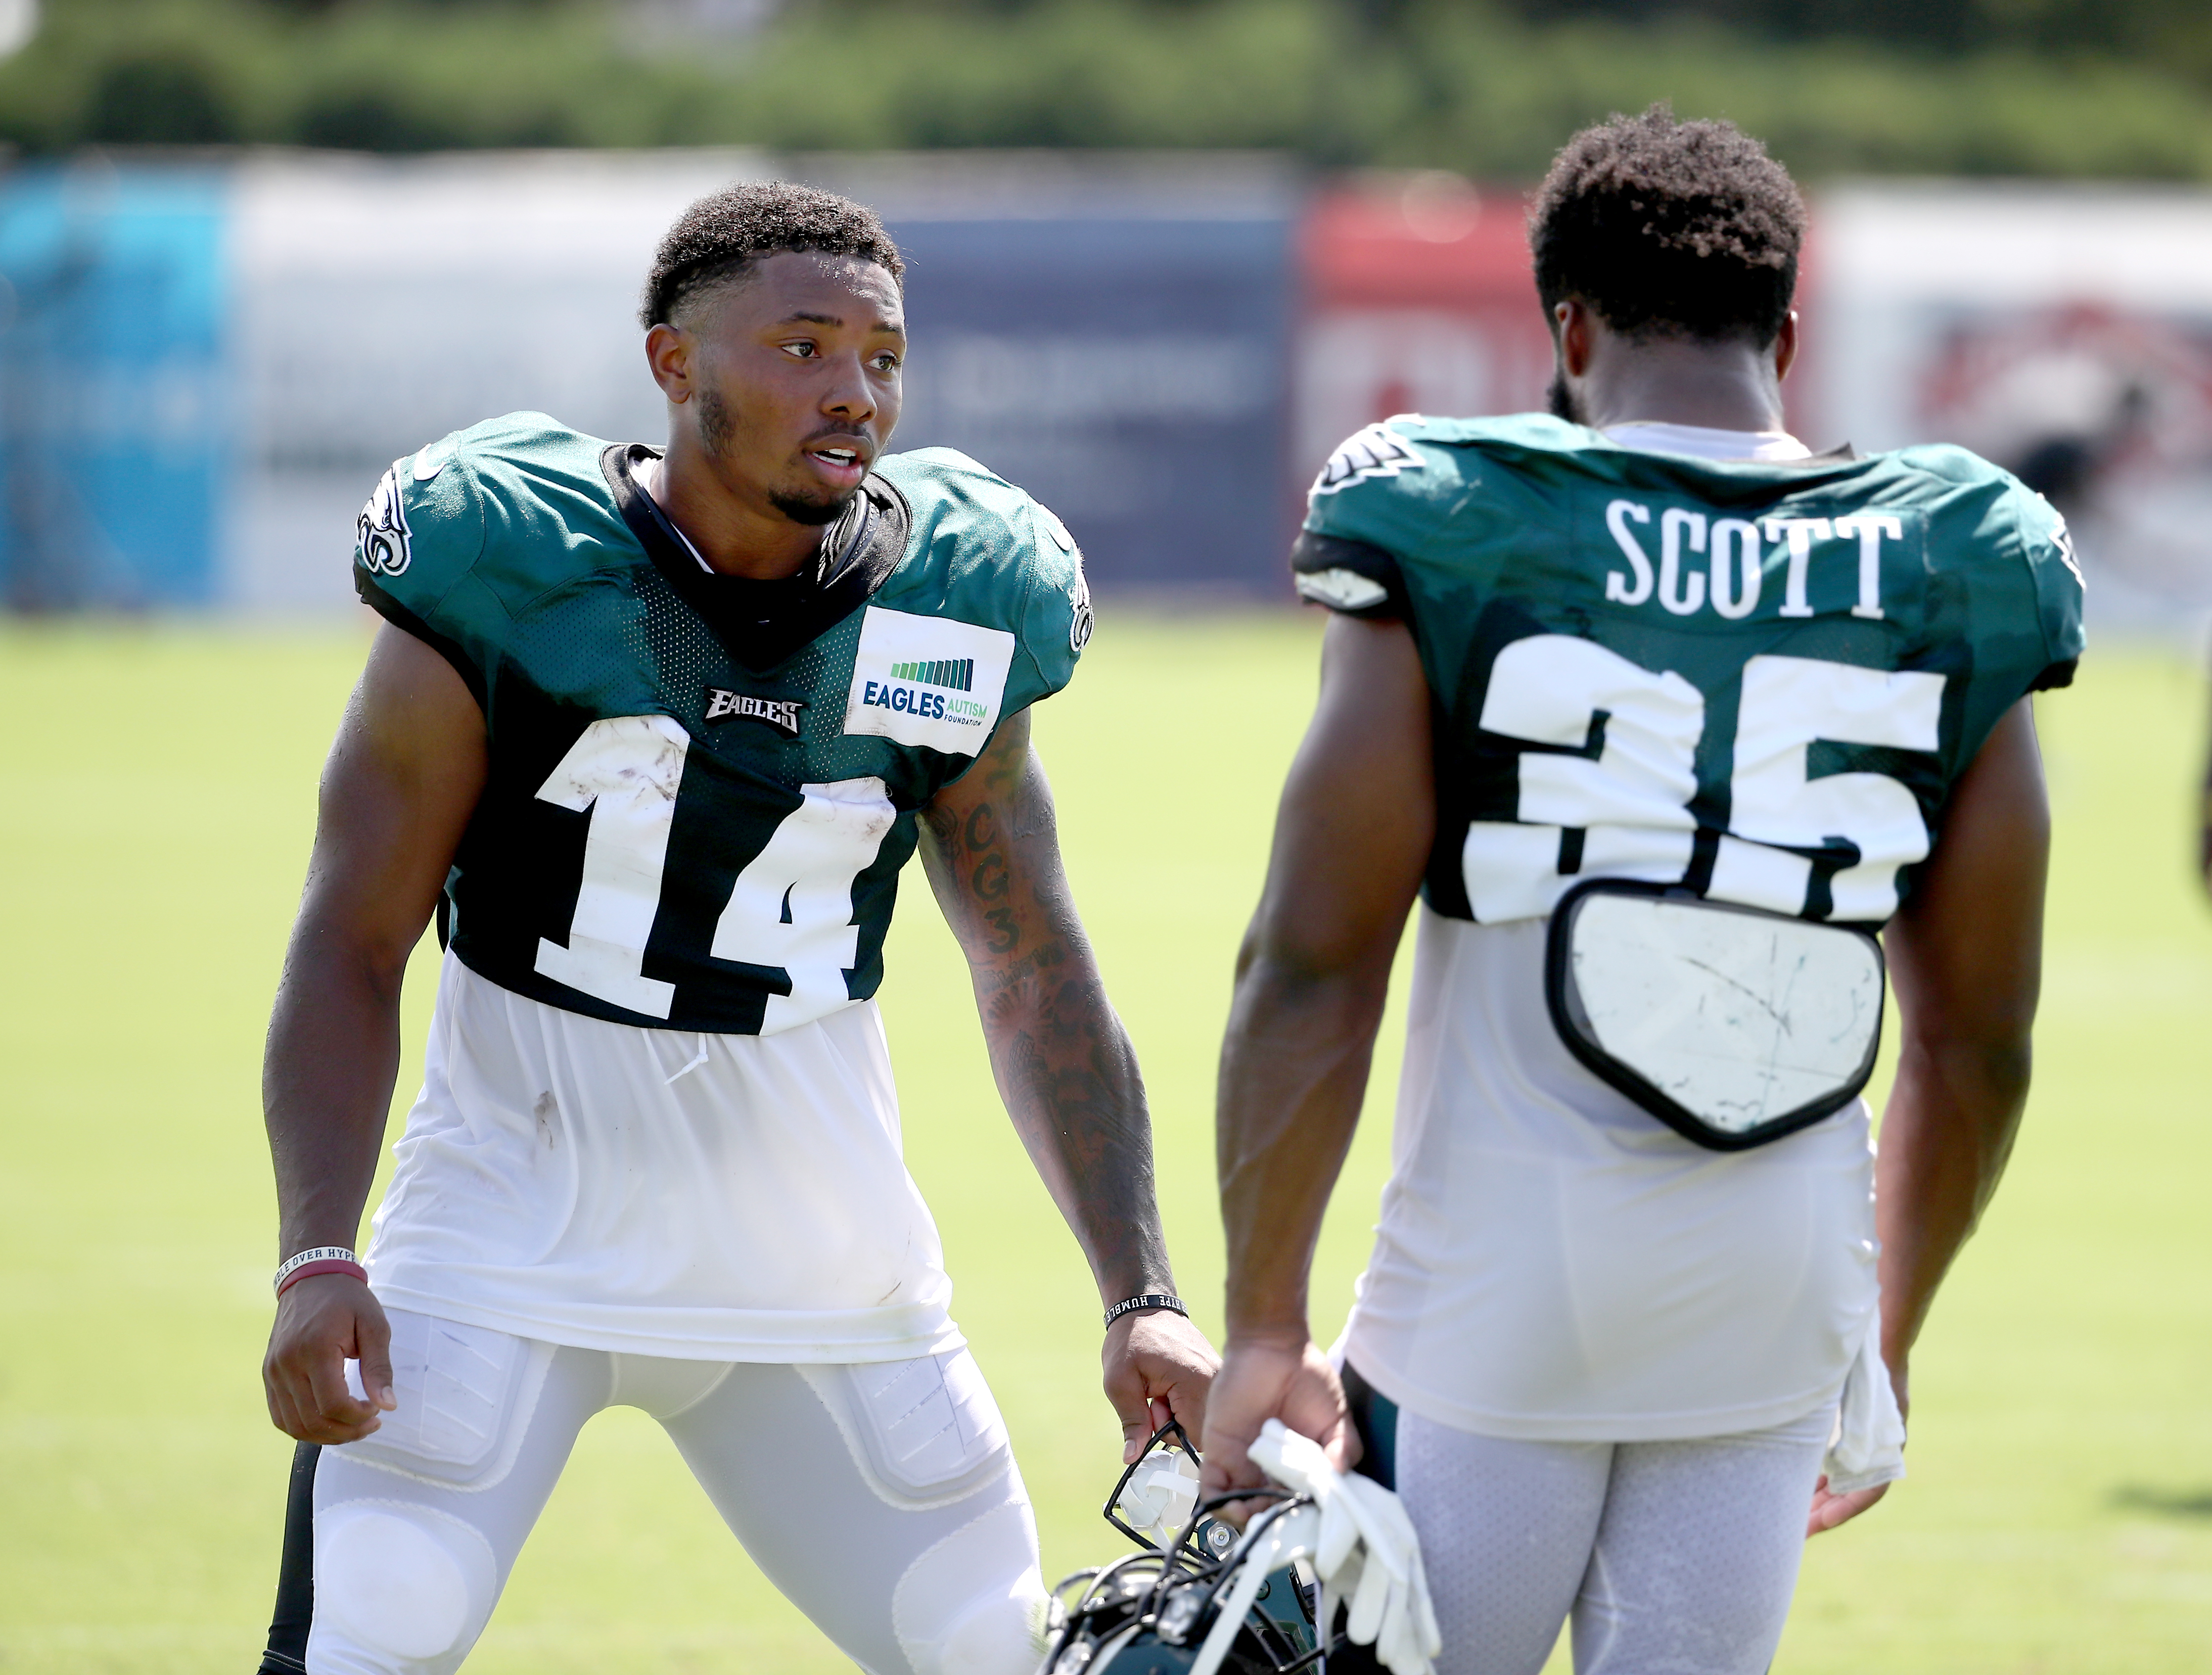 Eagles wide receiver A.J. Brown at peace with career following Titans trade